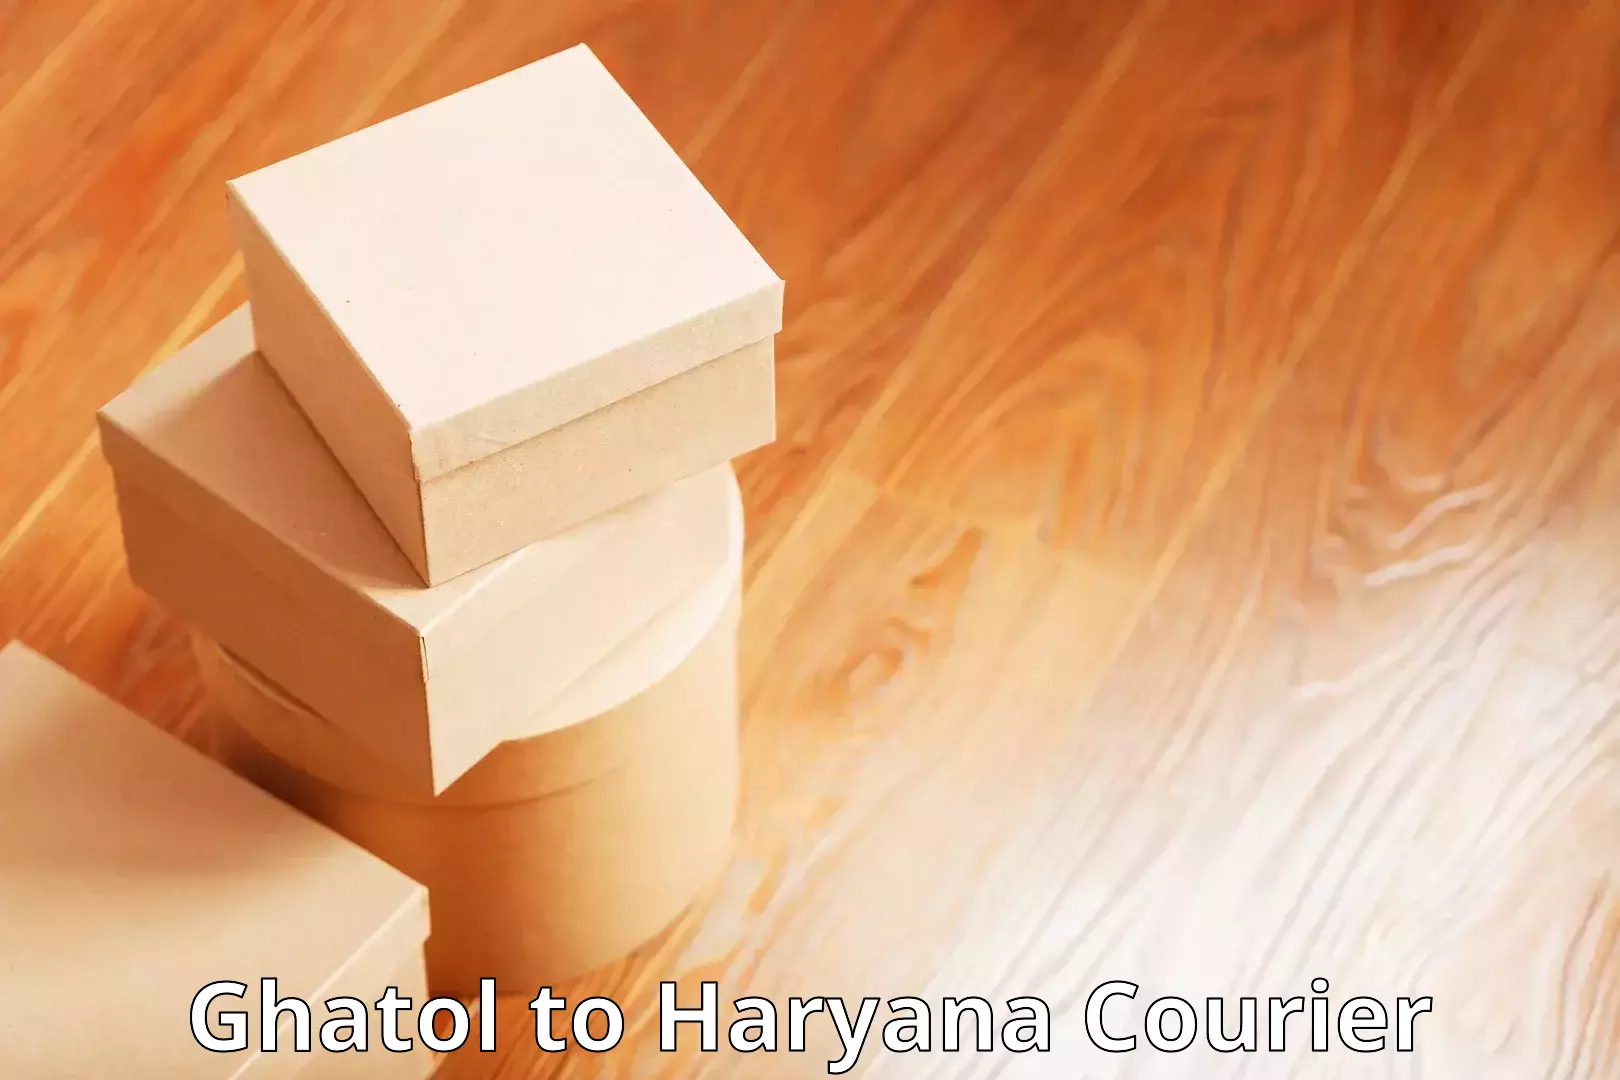 On-call courier service Ghatol to Gurgaon